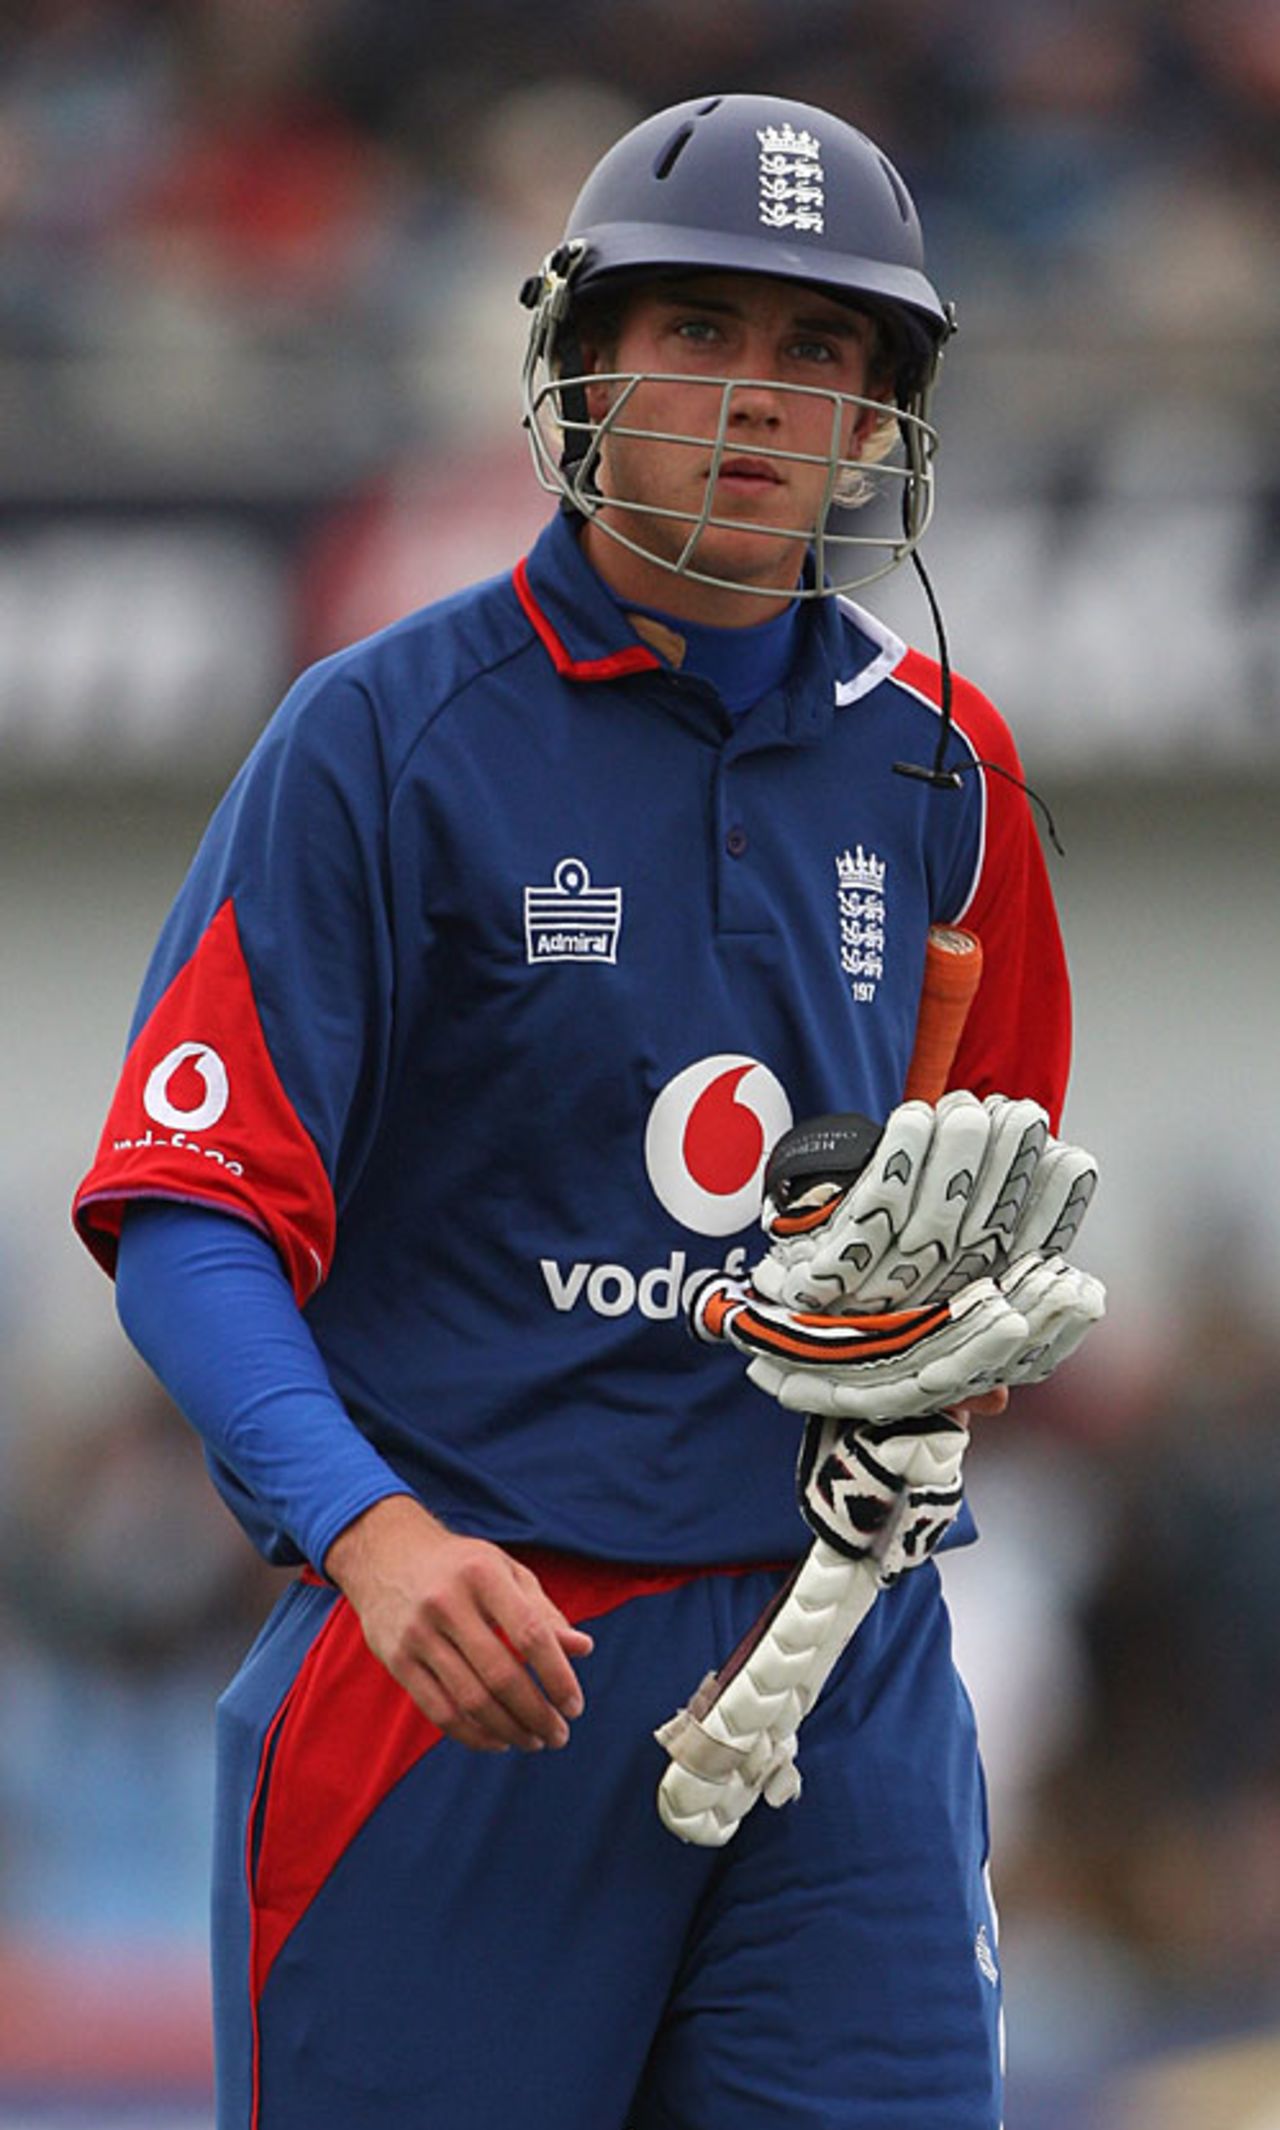 After the highs of Old Trafford, Stuart Broad had a poor game at Headingley, England v India, 5th ODI, Headingley, September 2, 2007